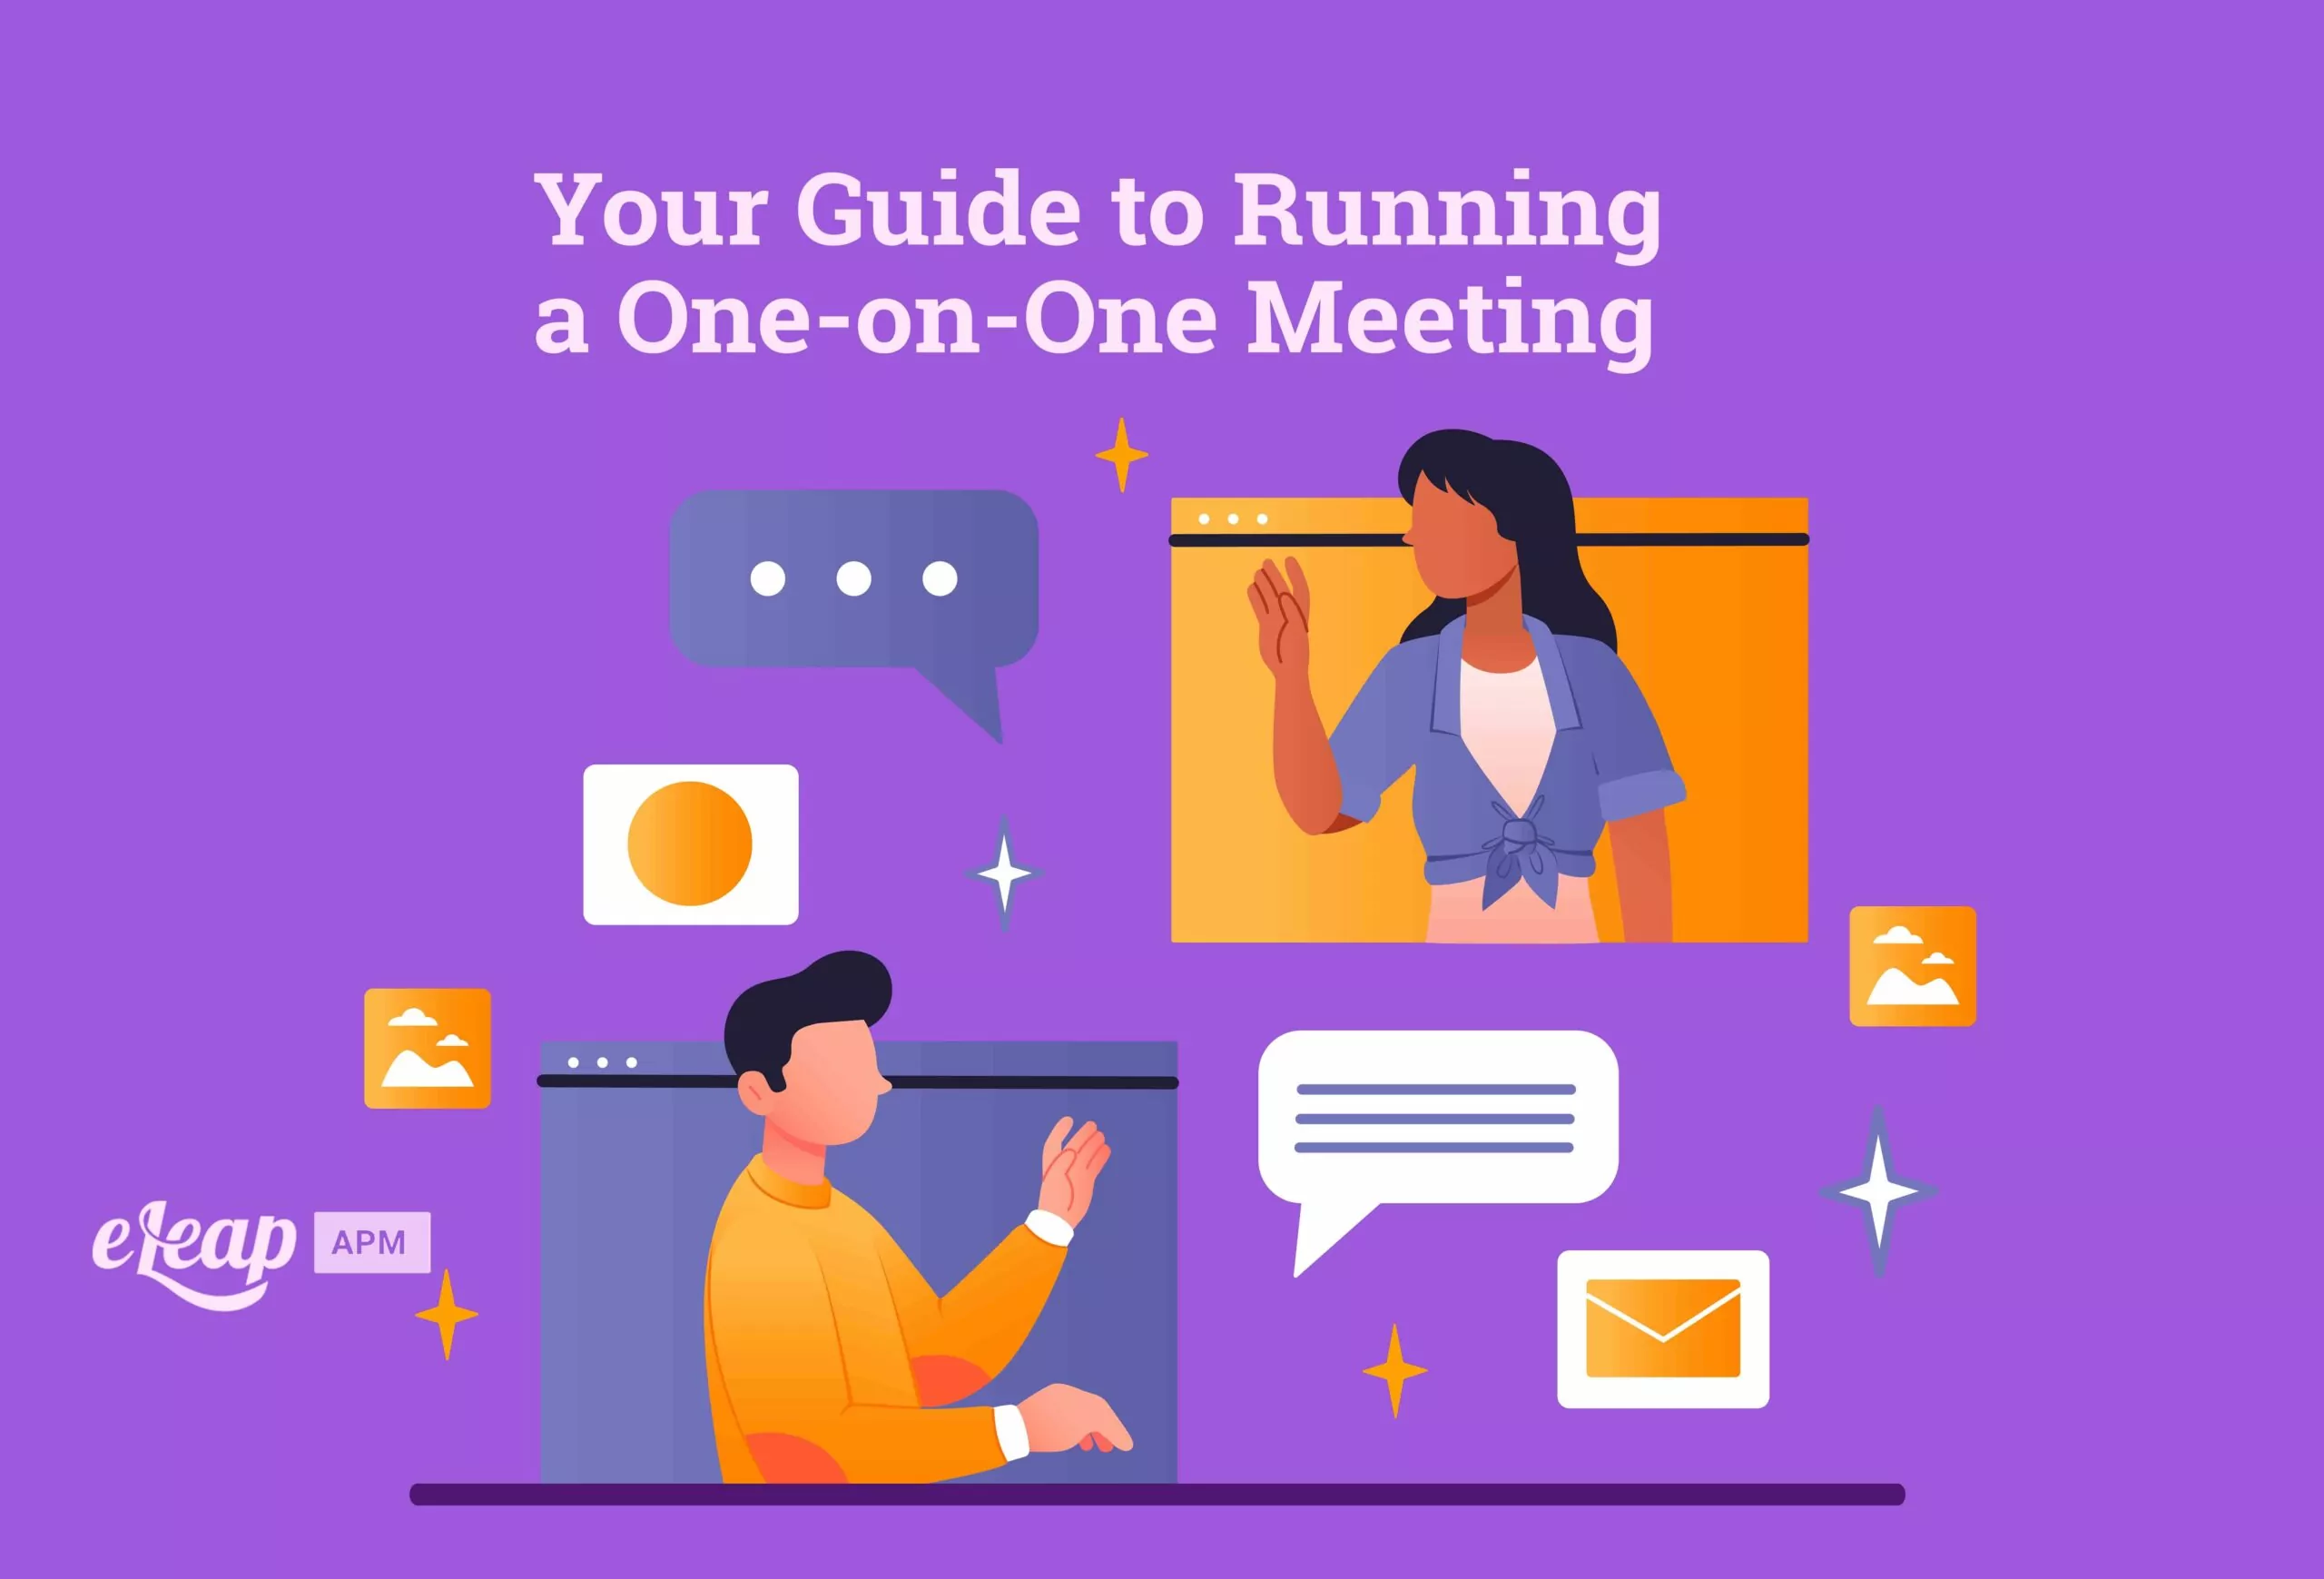 Your Guide to Running a One-on-One Meeting